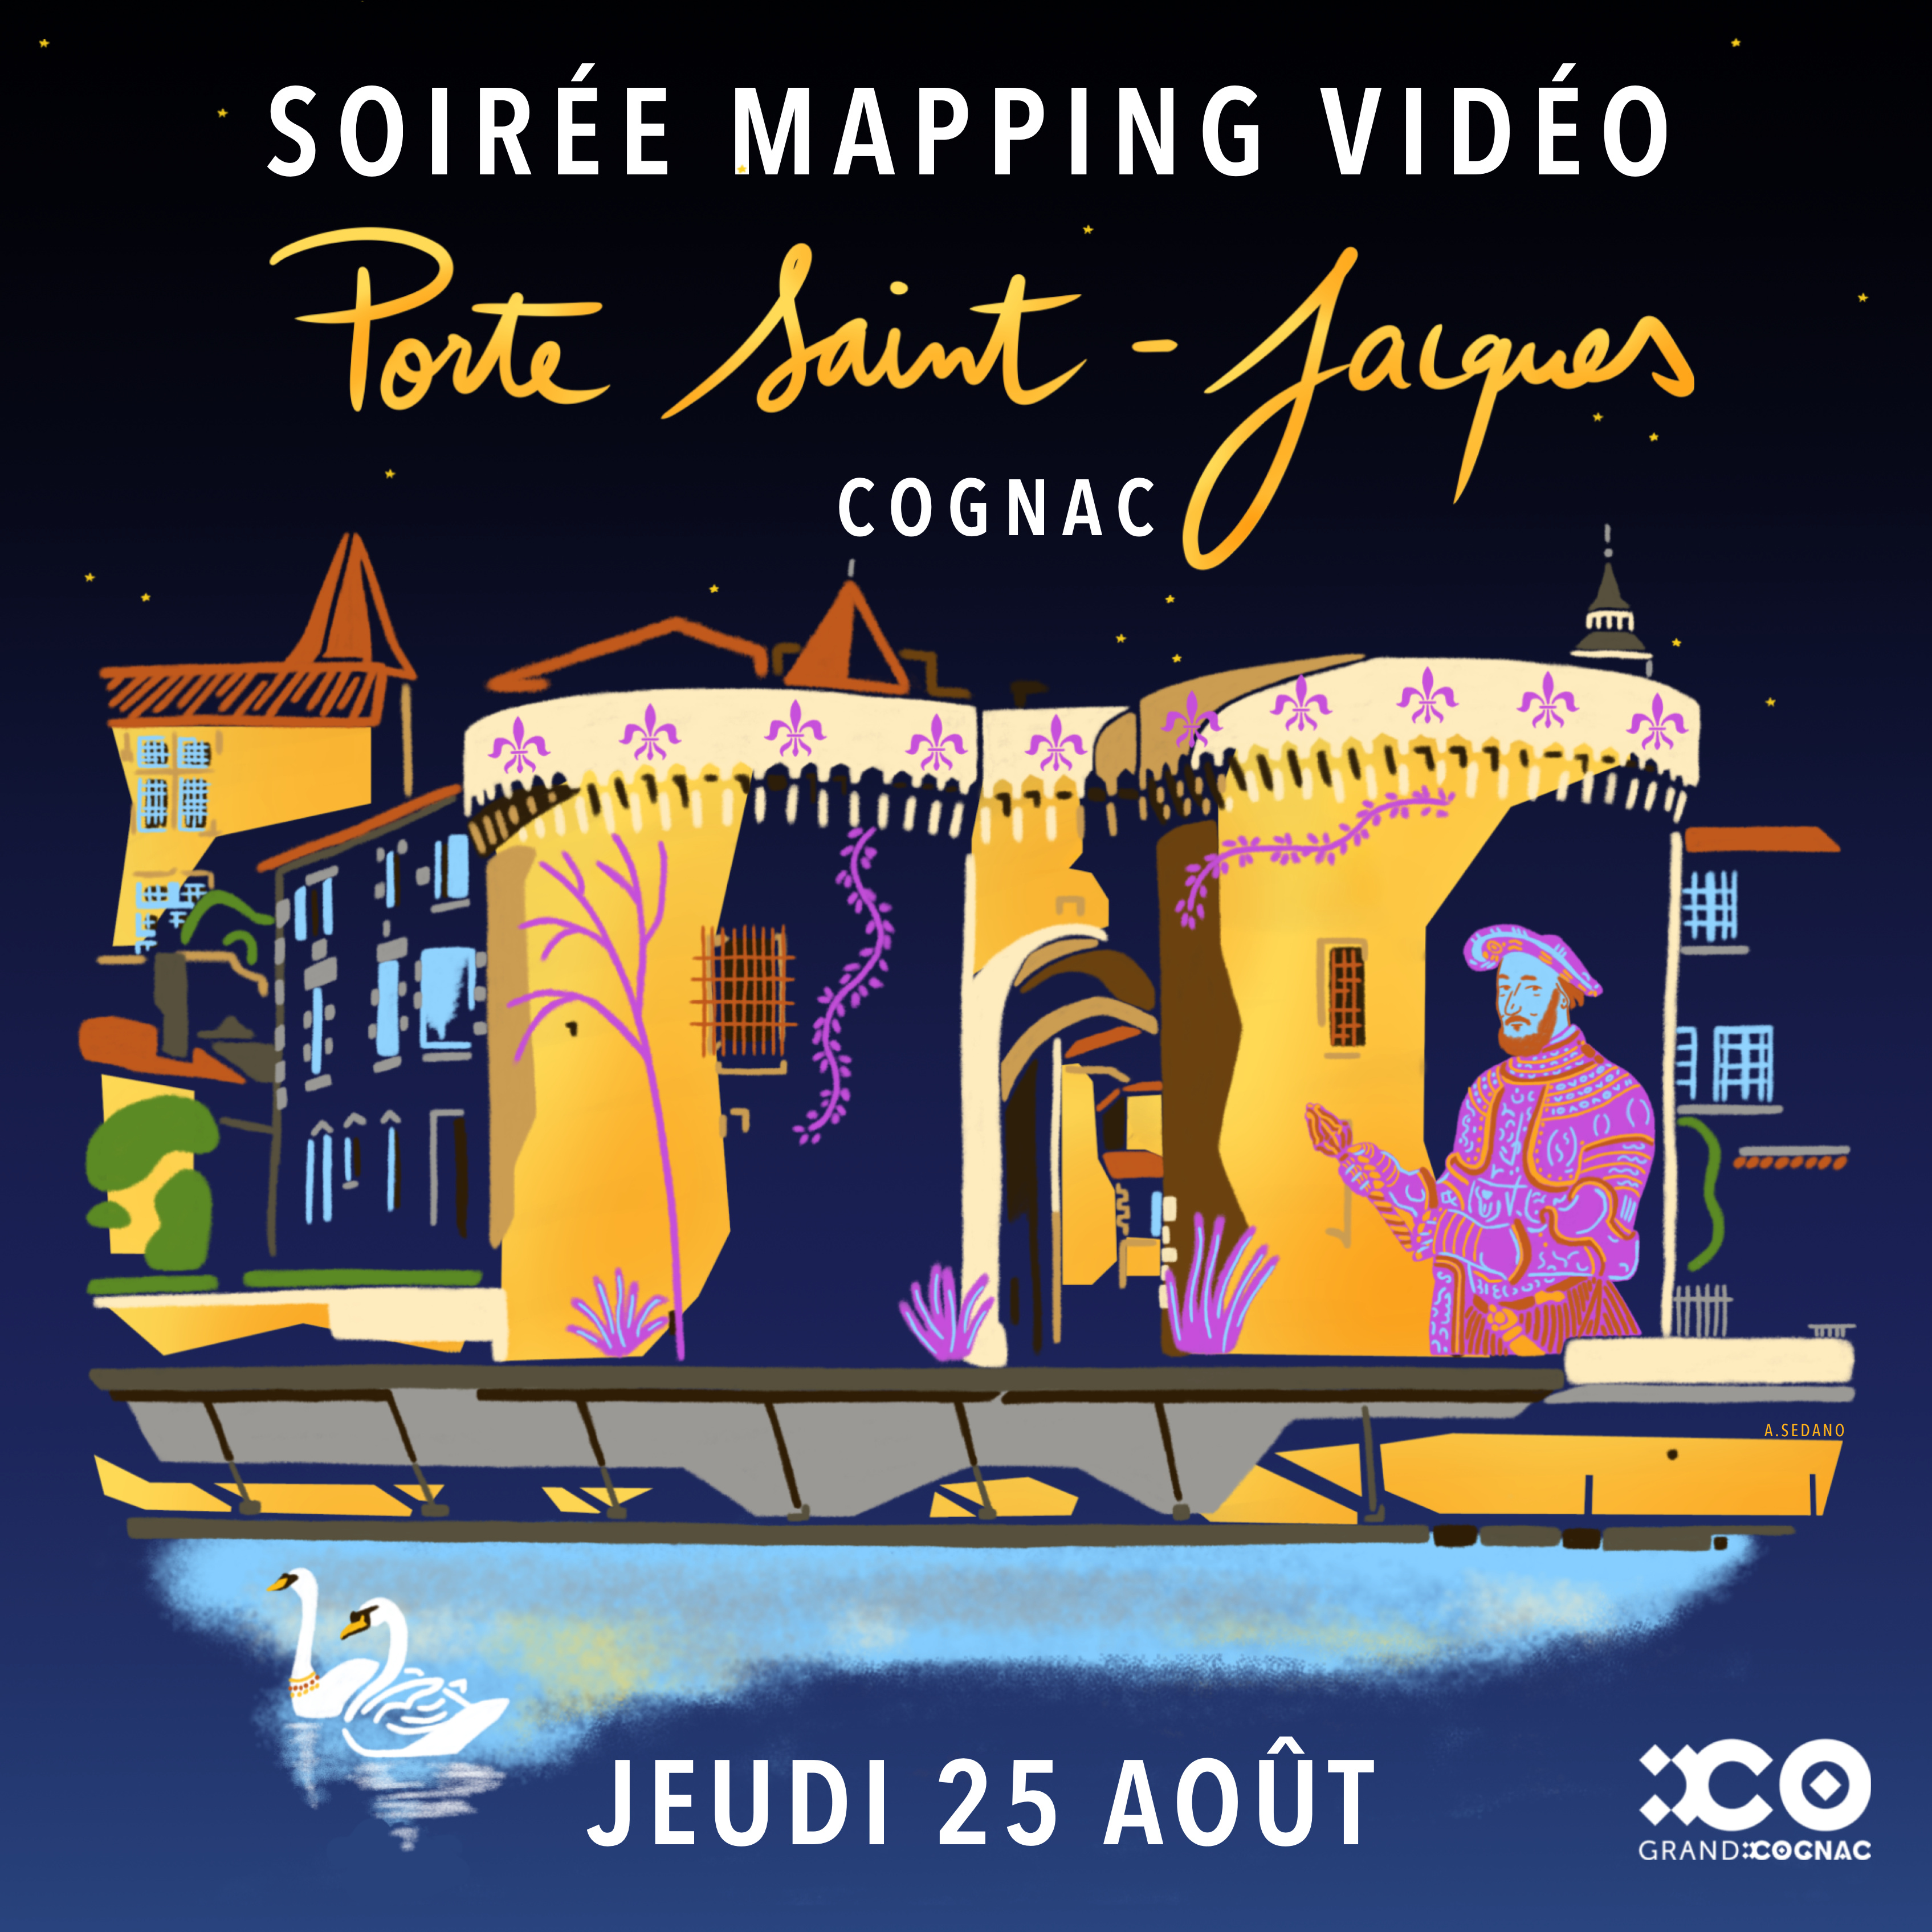 SOIREE MAPPING VIDEO JEUDI 25 AOUT